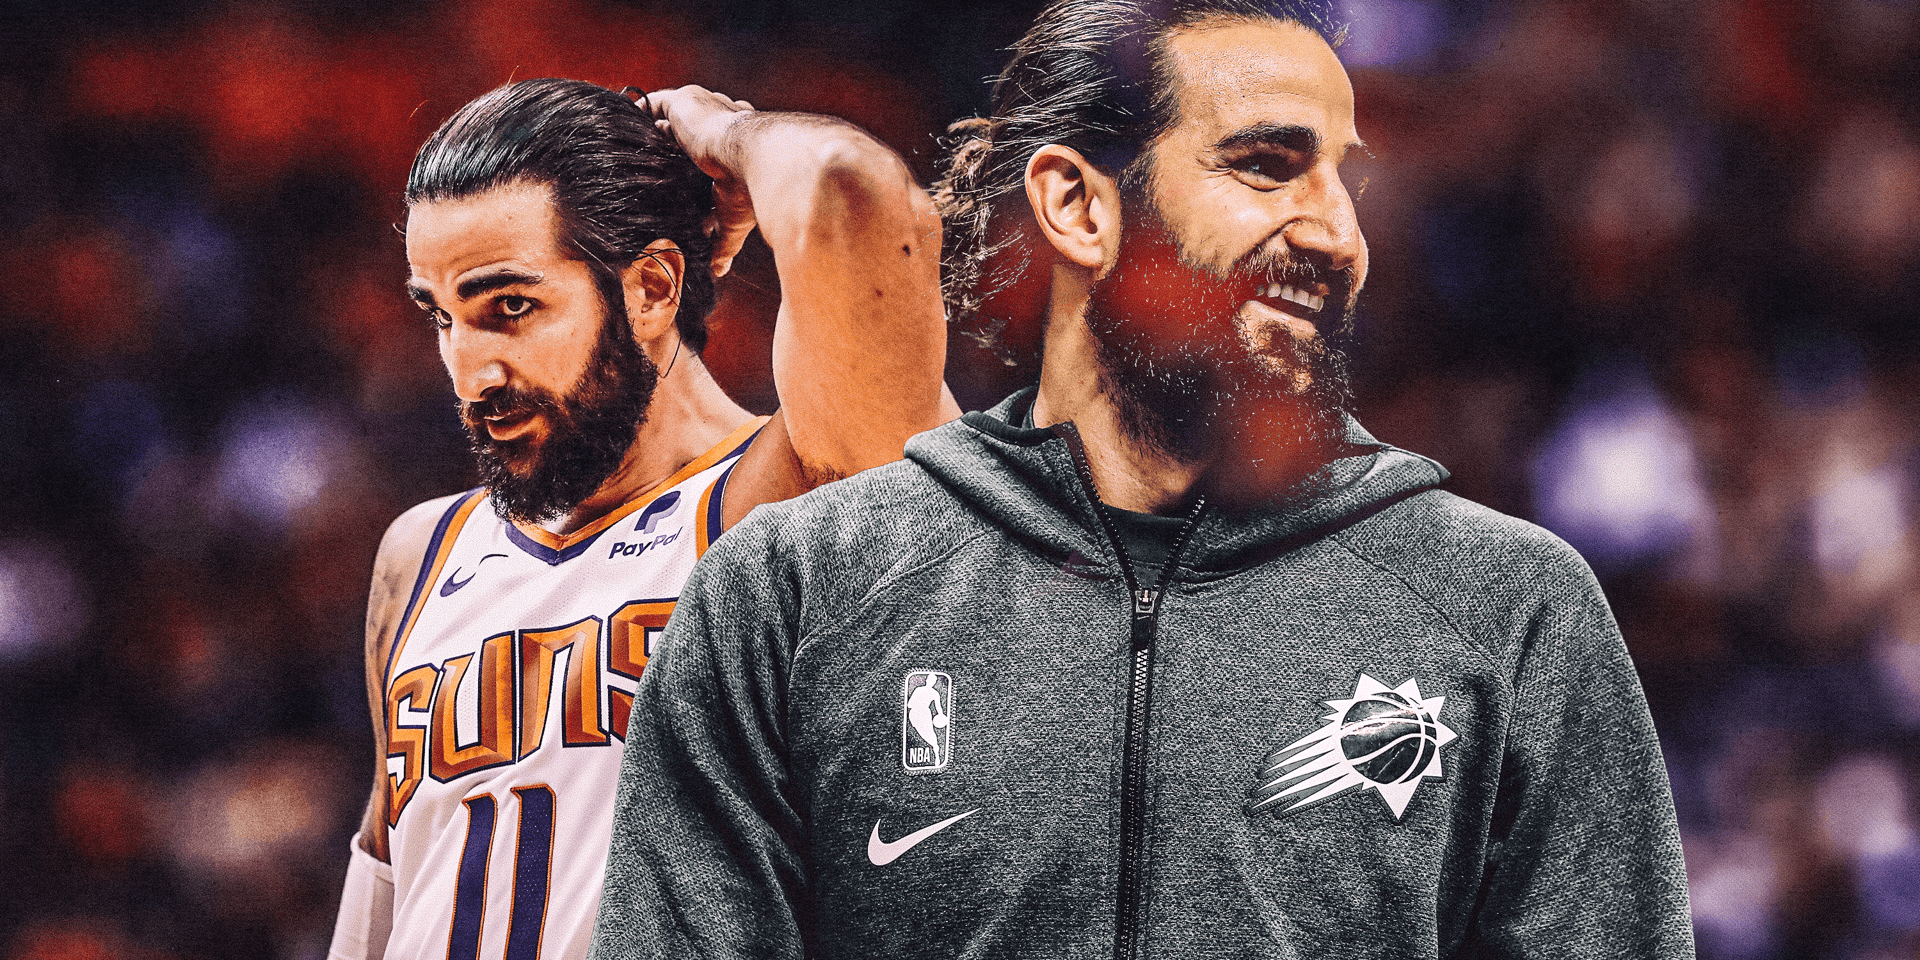 Ricky Rubio reflects on his NBA career and the dark days that occurred: ‘I was lost’